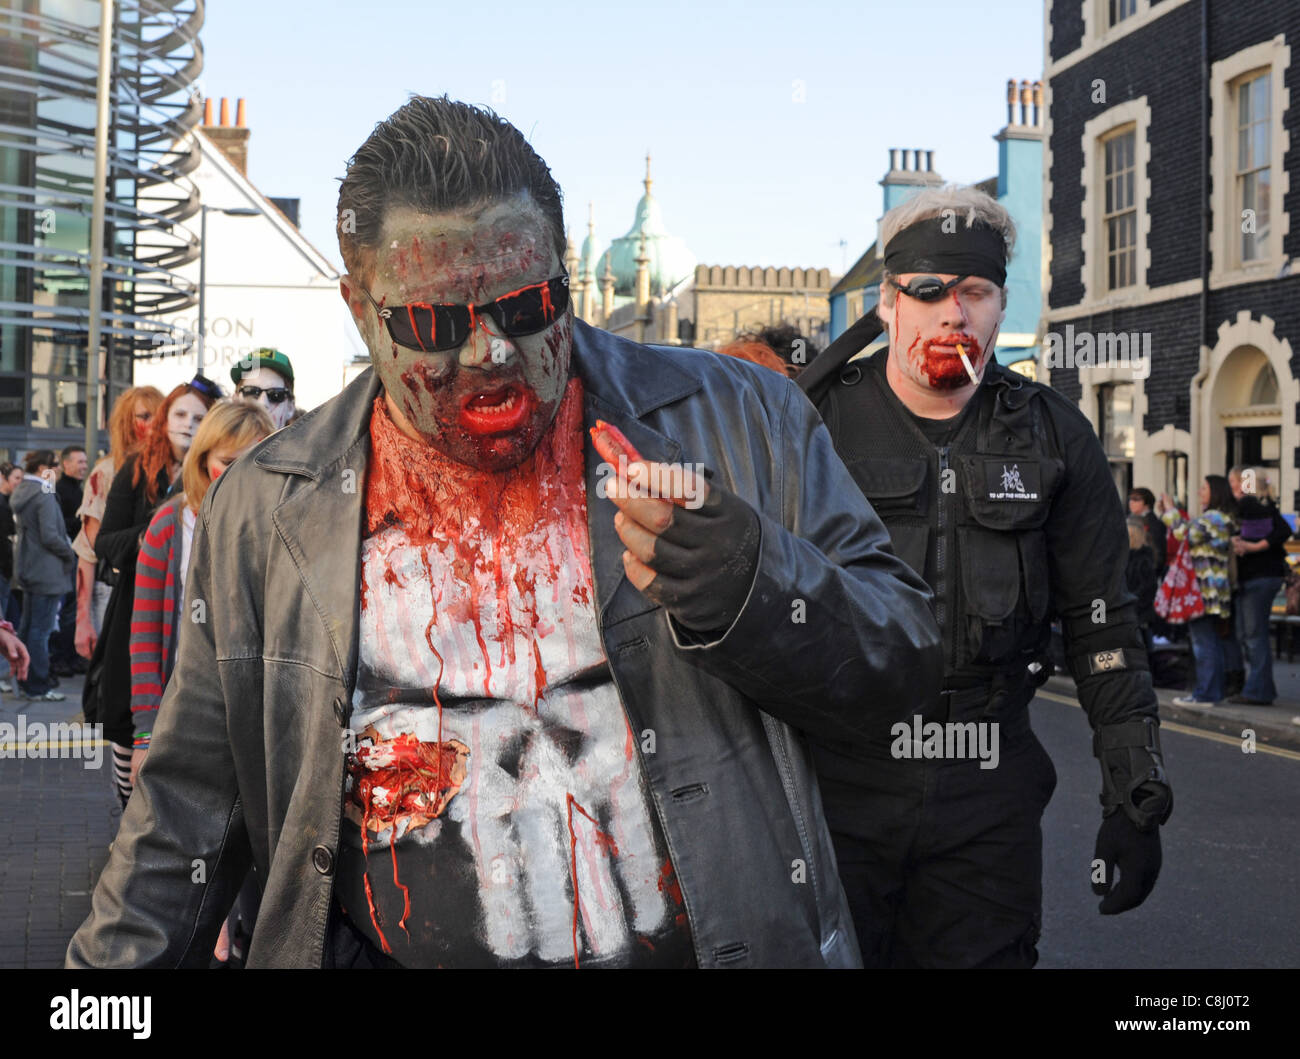 Brighton Zombie Walk High Resolution Stock Photography and Images - Alamy